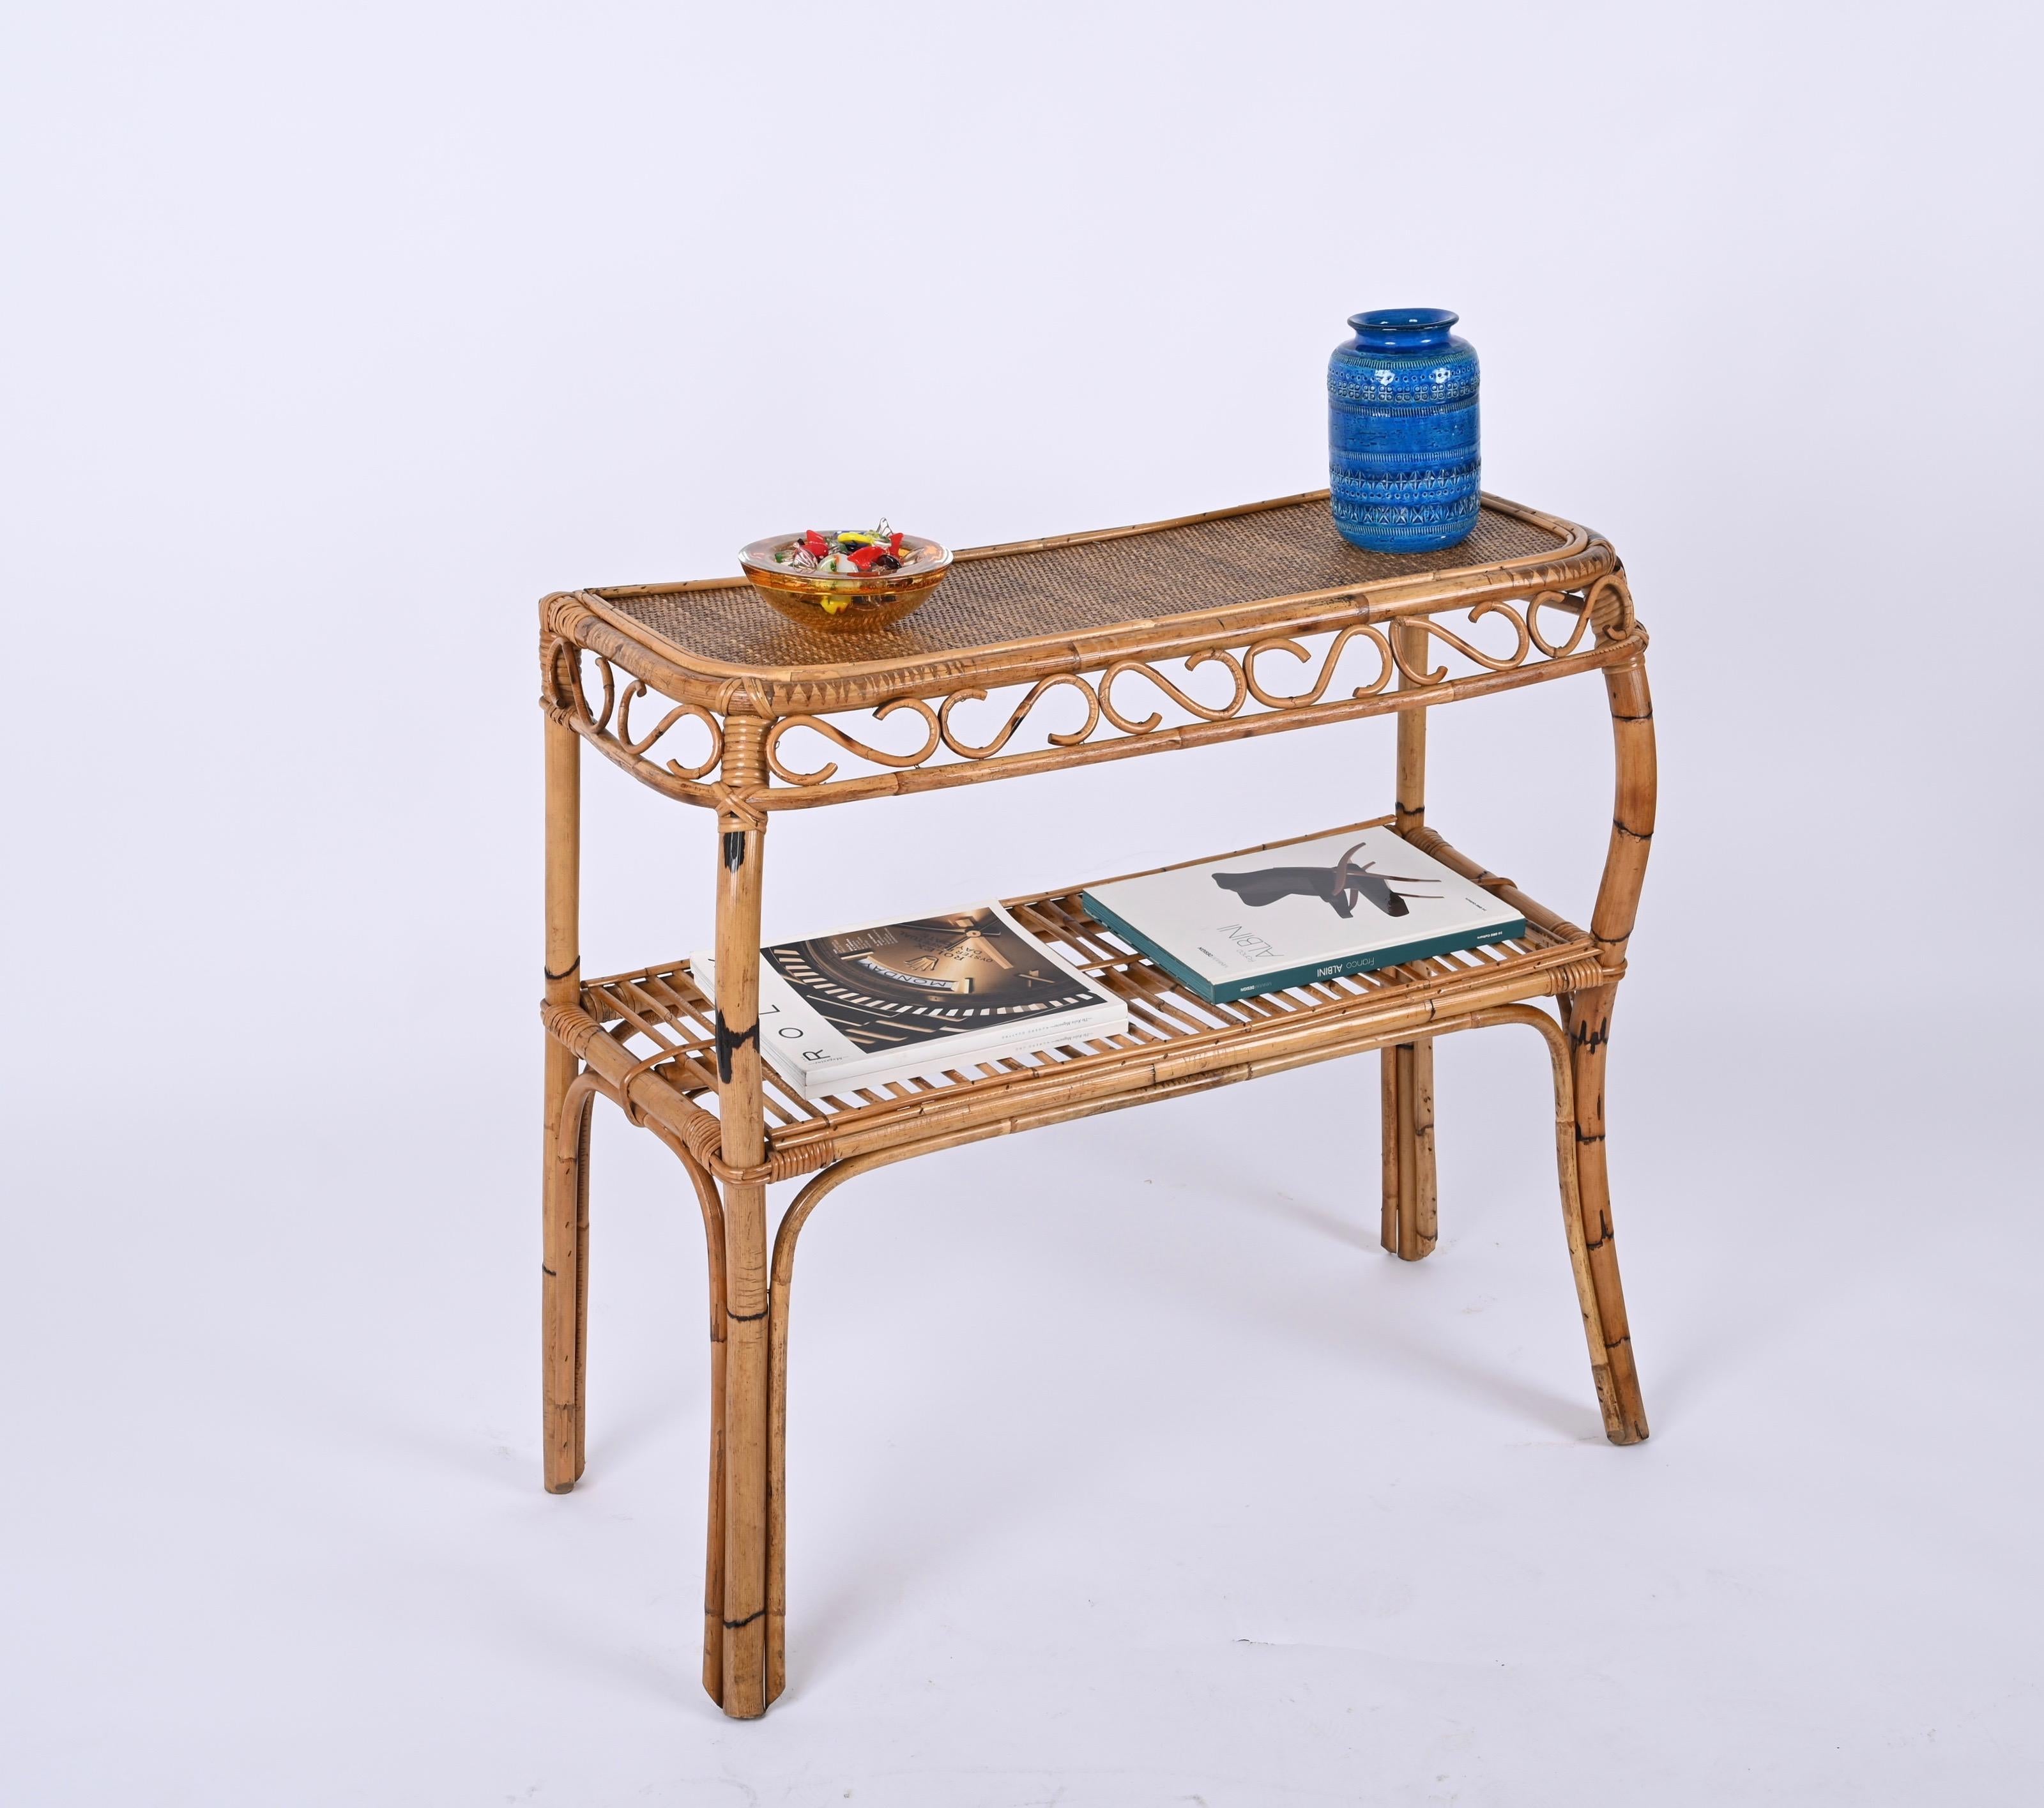 Hand-Crafted Midcentury Bamboo and Rattan Console Table, Franco Albini, Italy, 1960s For Sale